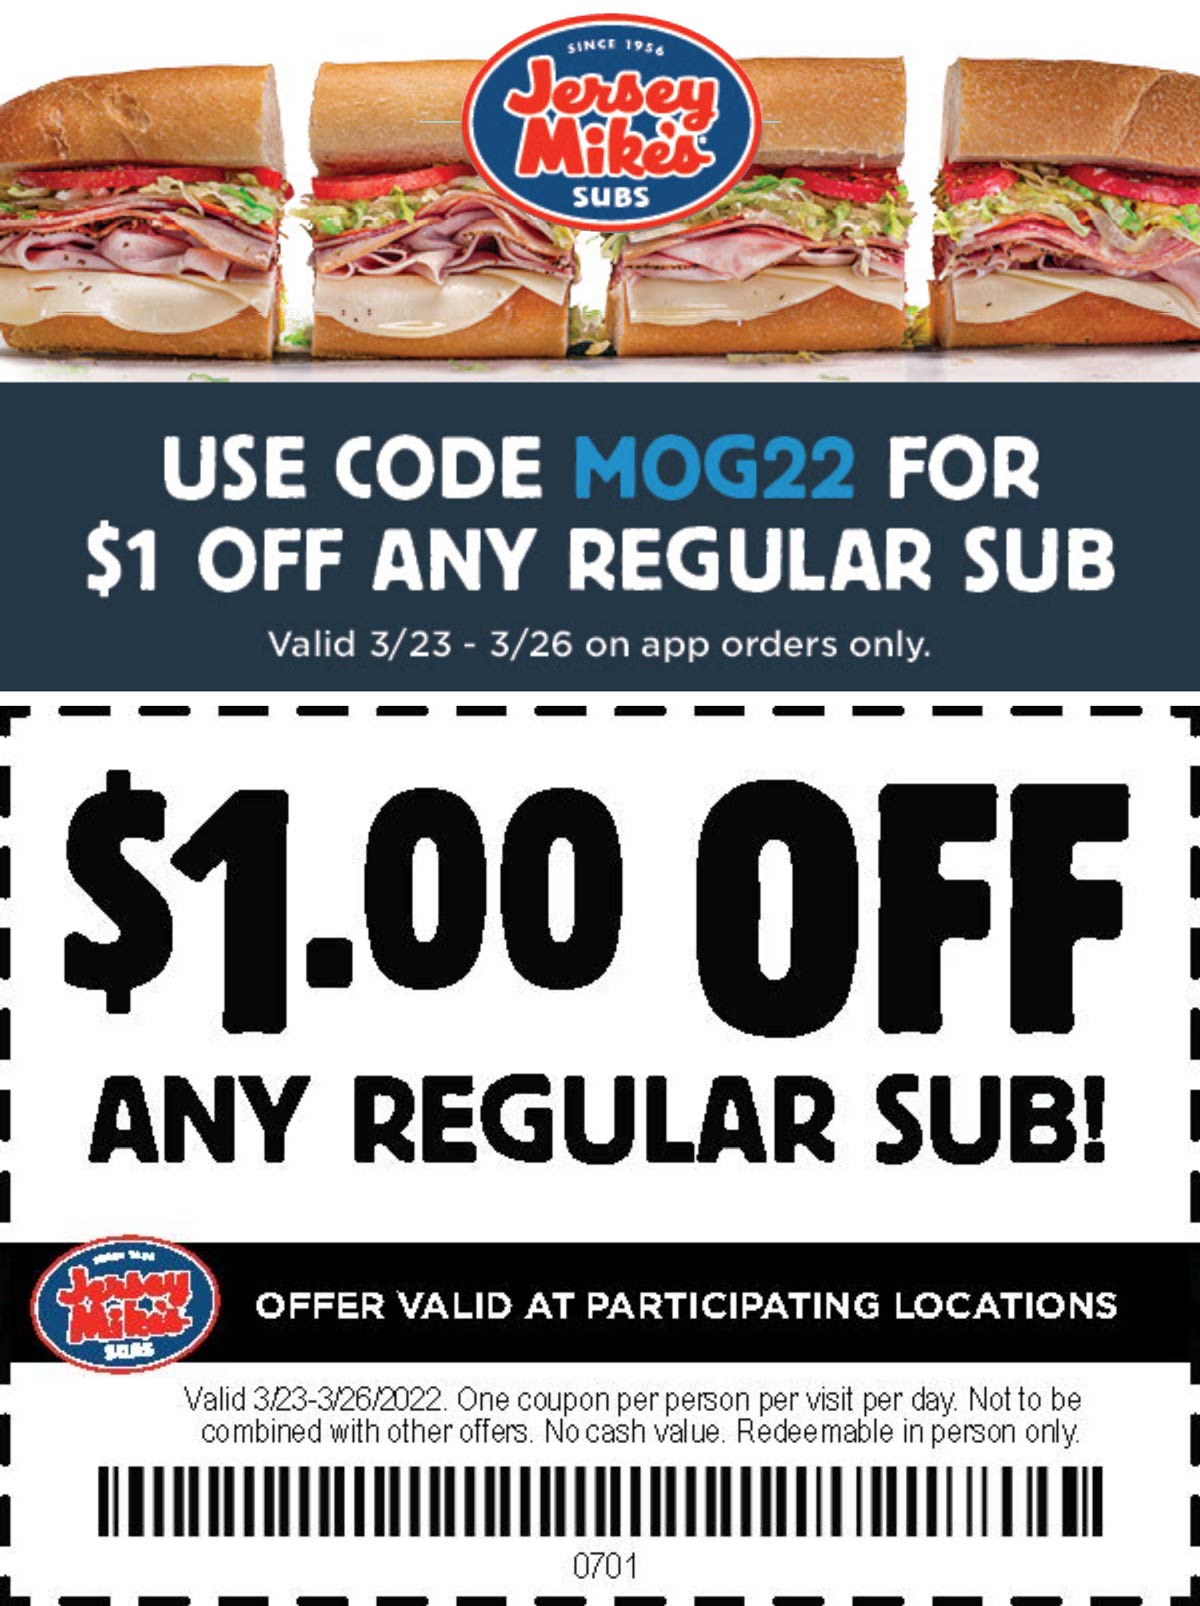 Jersey Mikes restaurants Coupon  $1 off a sub sandwich at Jersey Mikes via promo code MOG22 #jerseymikes 